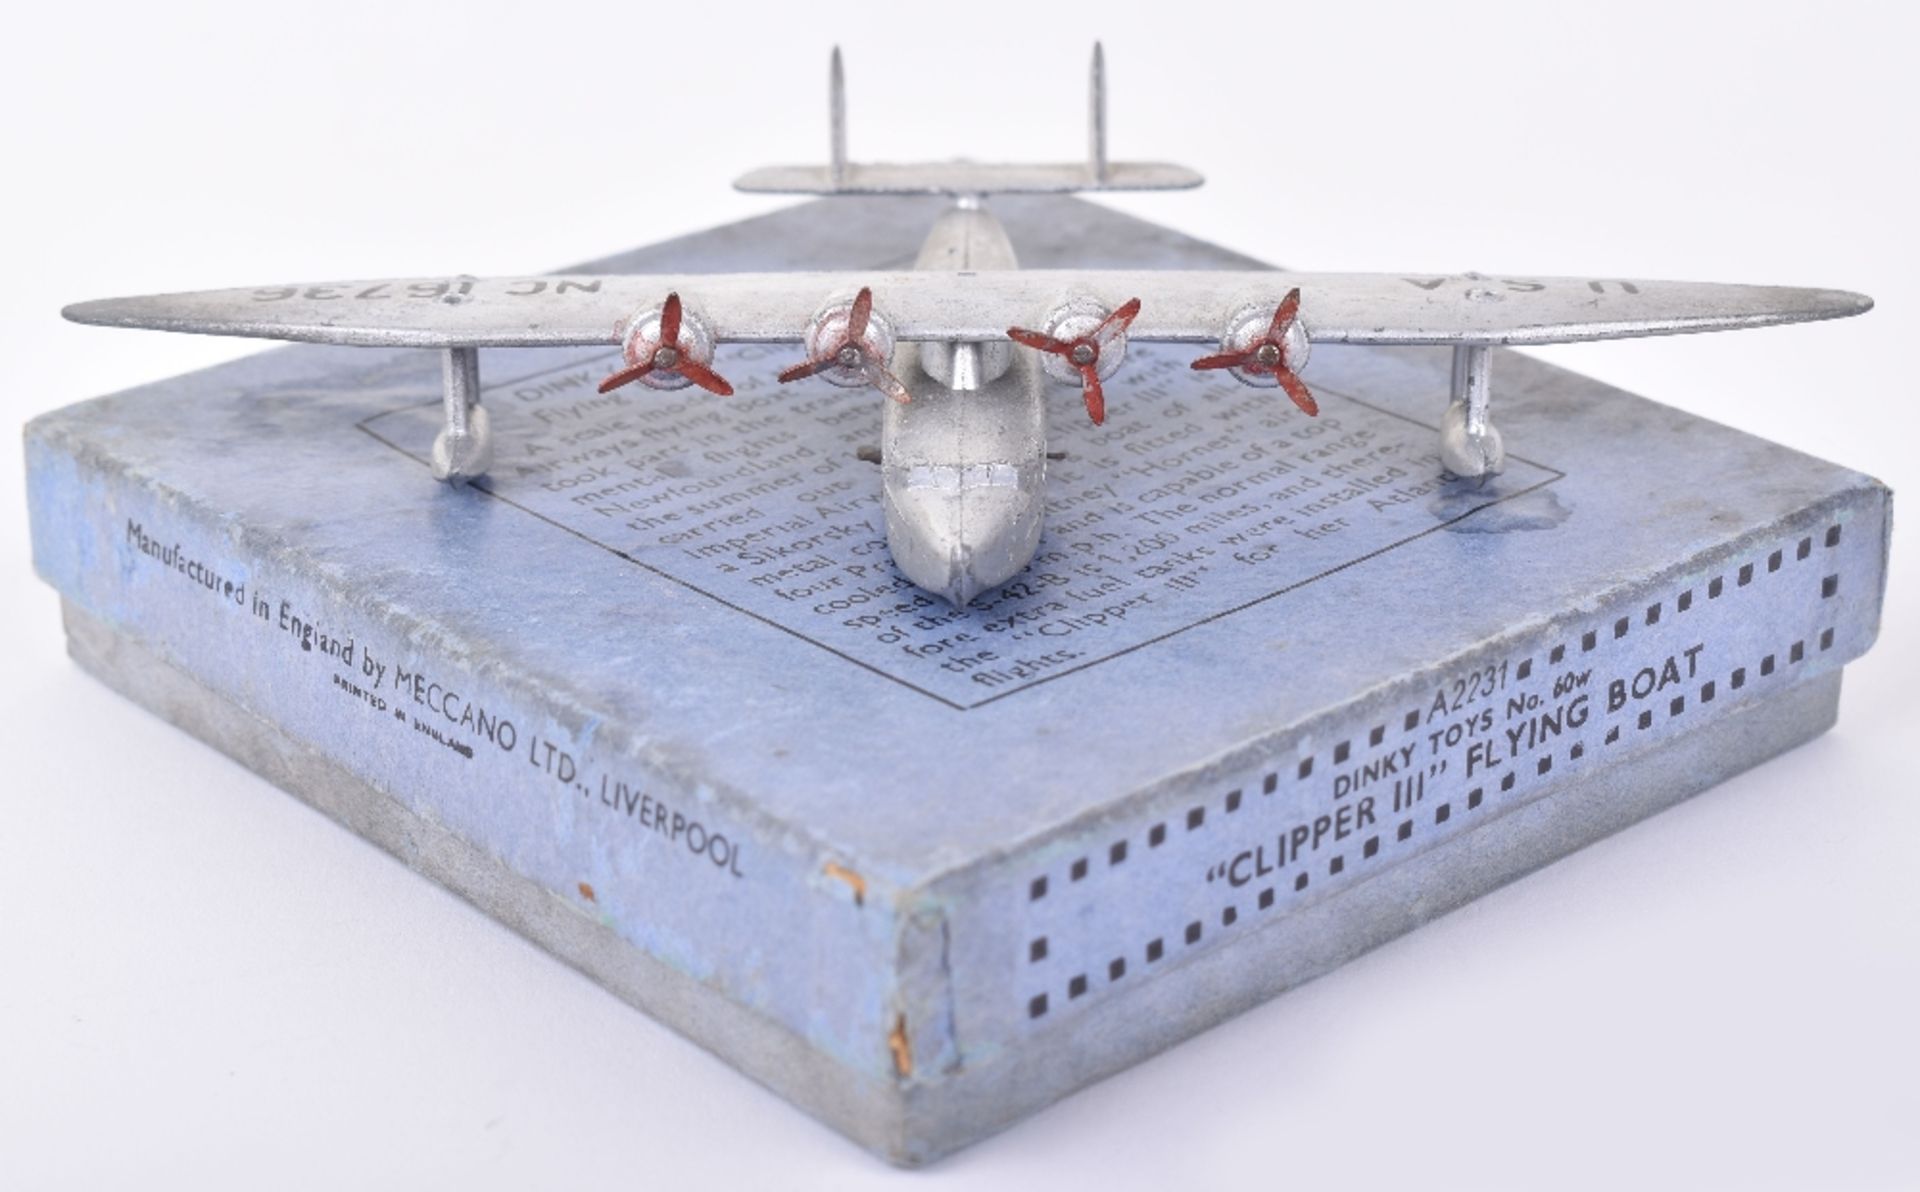 Dinky Toys 60w “Clipper III” Flying Boat - Image 3 of 4